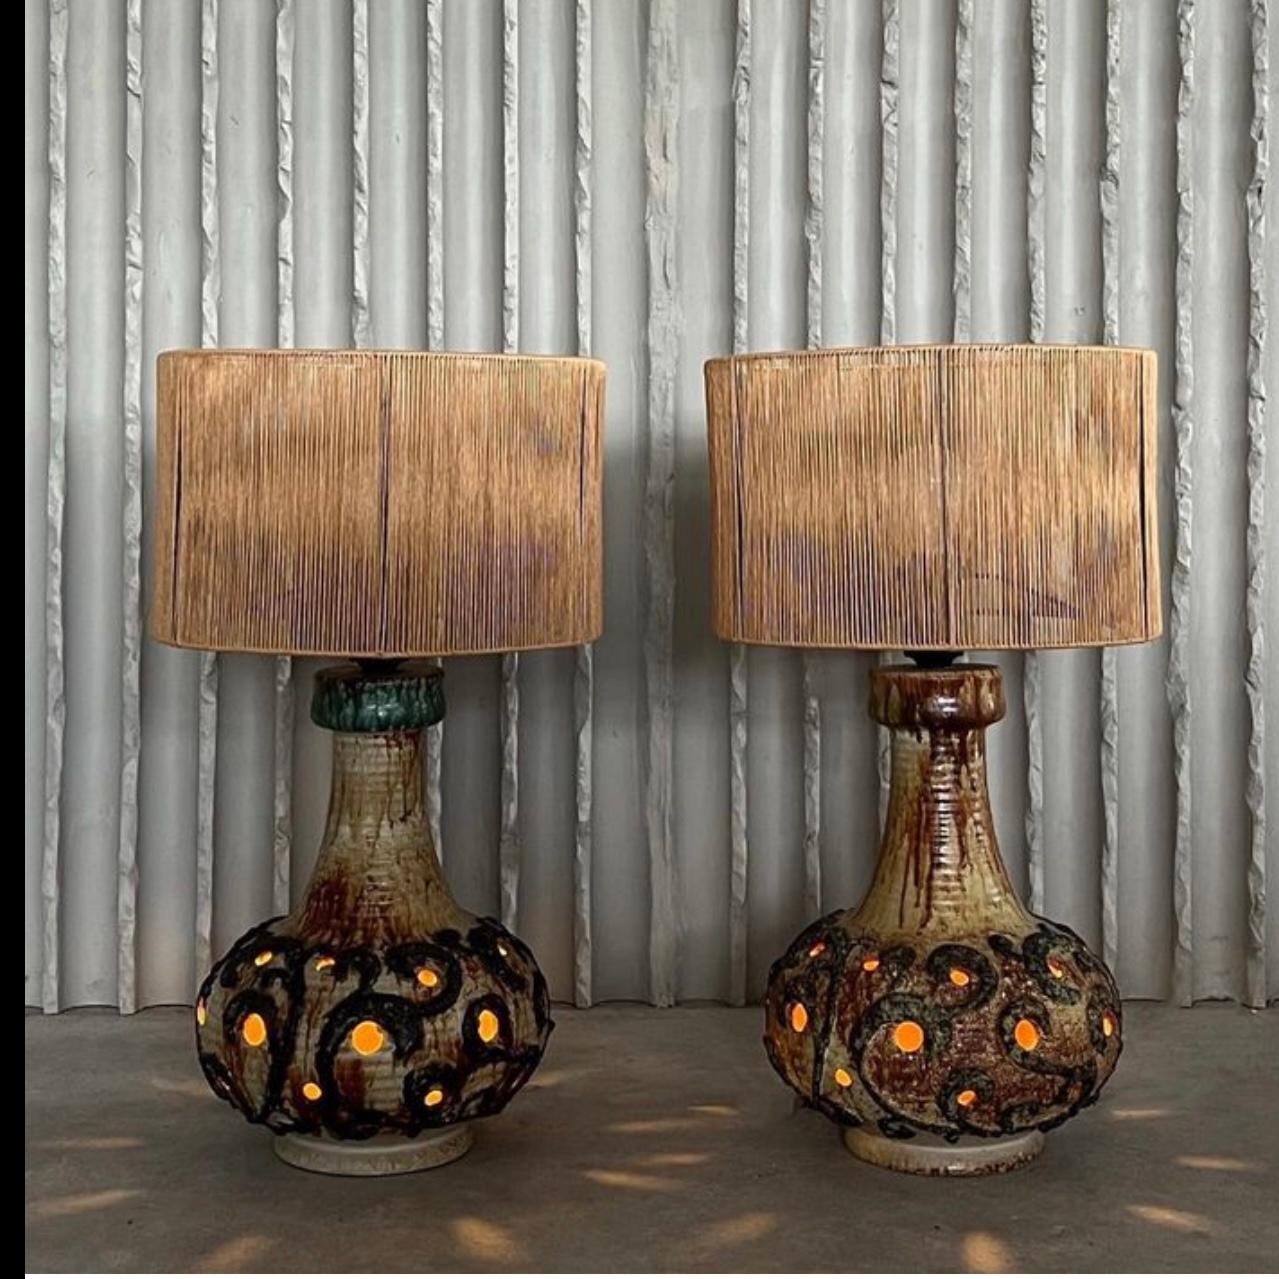 Pair of unusual earthy colored studio pottery lamps with exceptional texture and glazing and vertical rope shades.  The interior of the base lights up to cast warm glow.

Holland, circa 1970

Dimensions: 13W x 13 D x 23H (with shade)